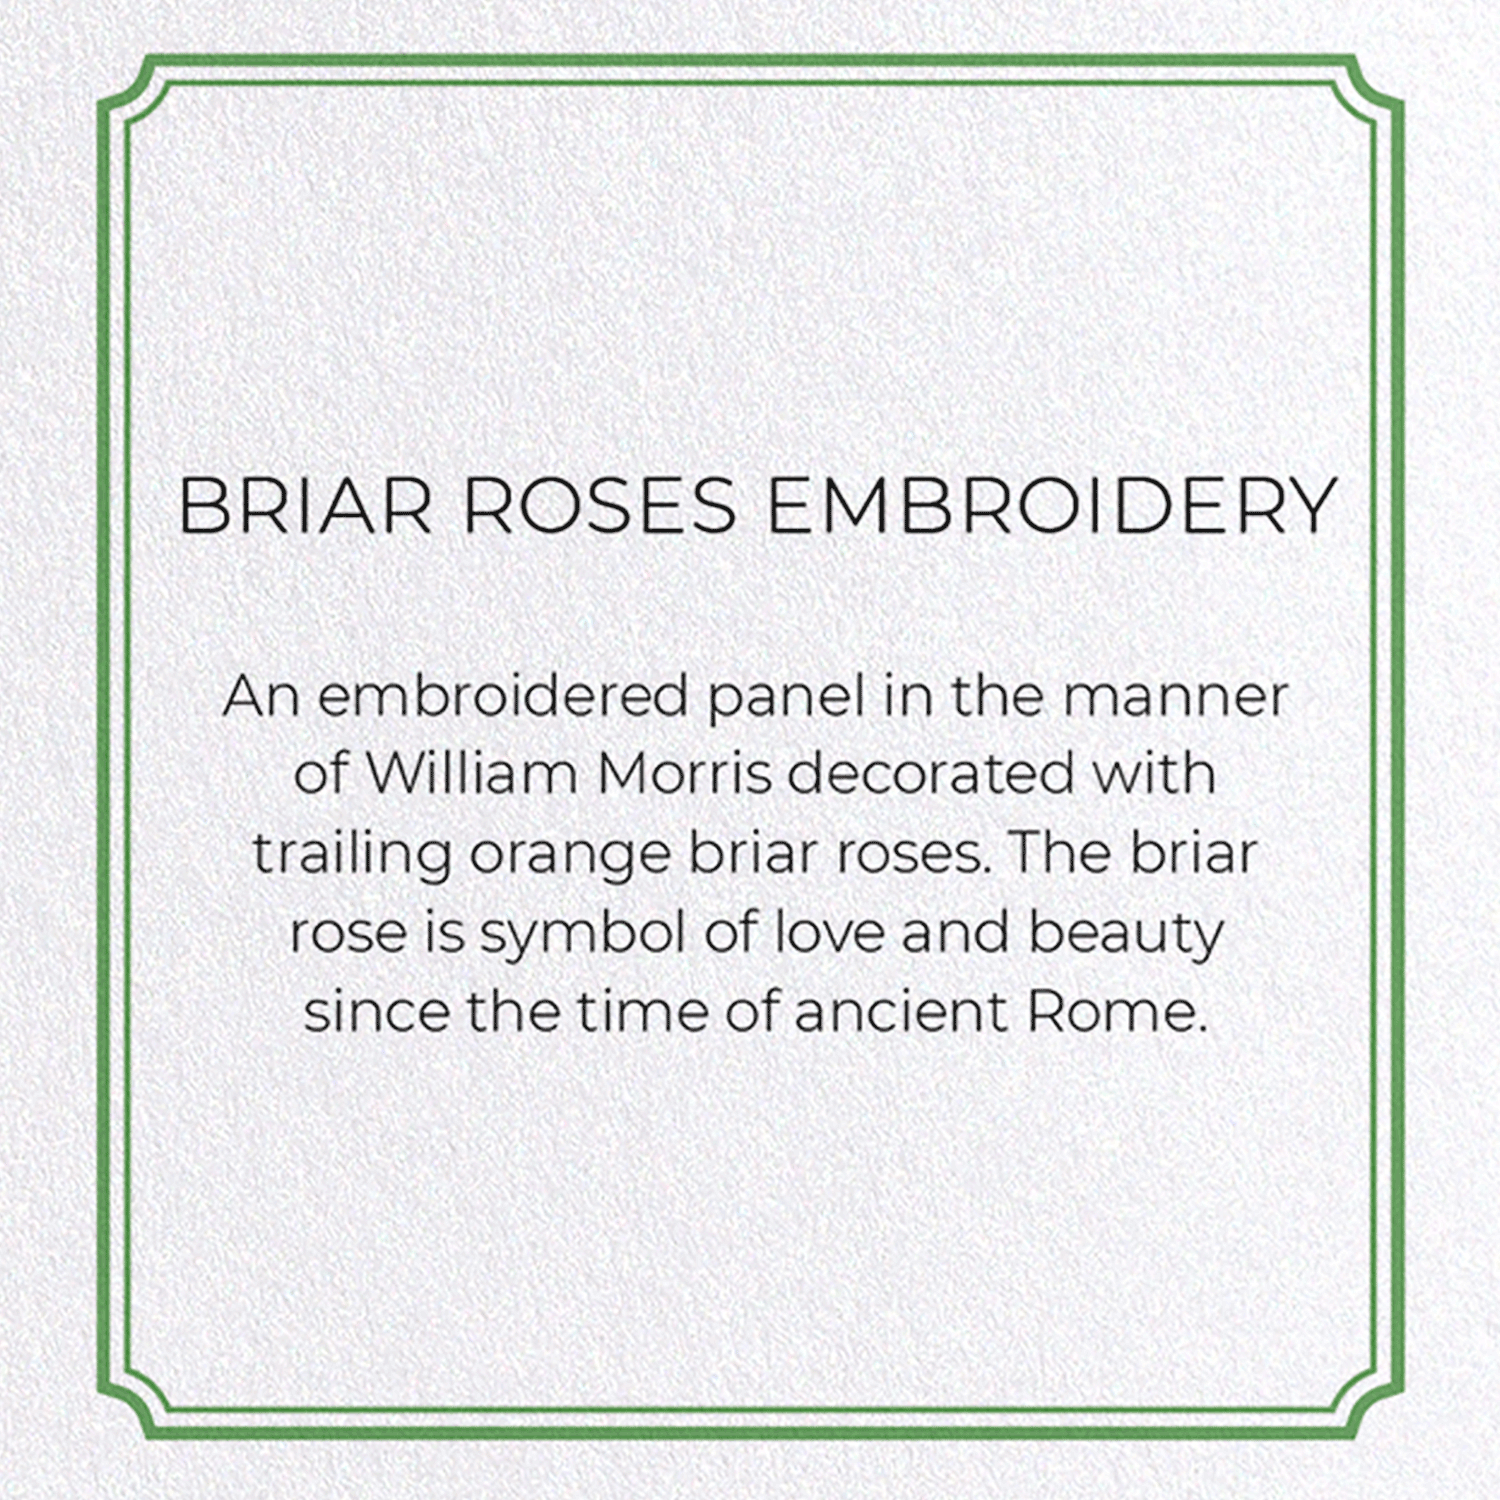 BRIAR ROSES EMBROIDERY